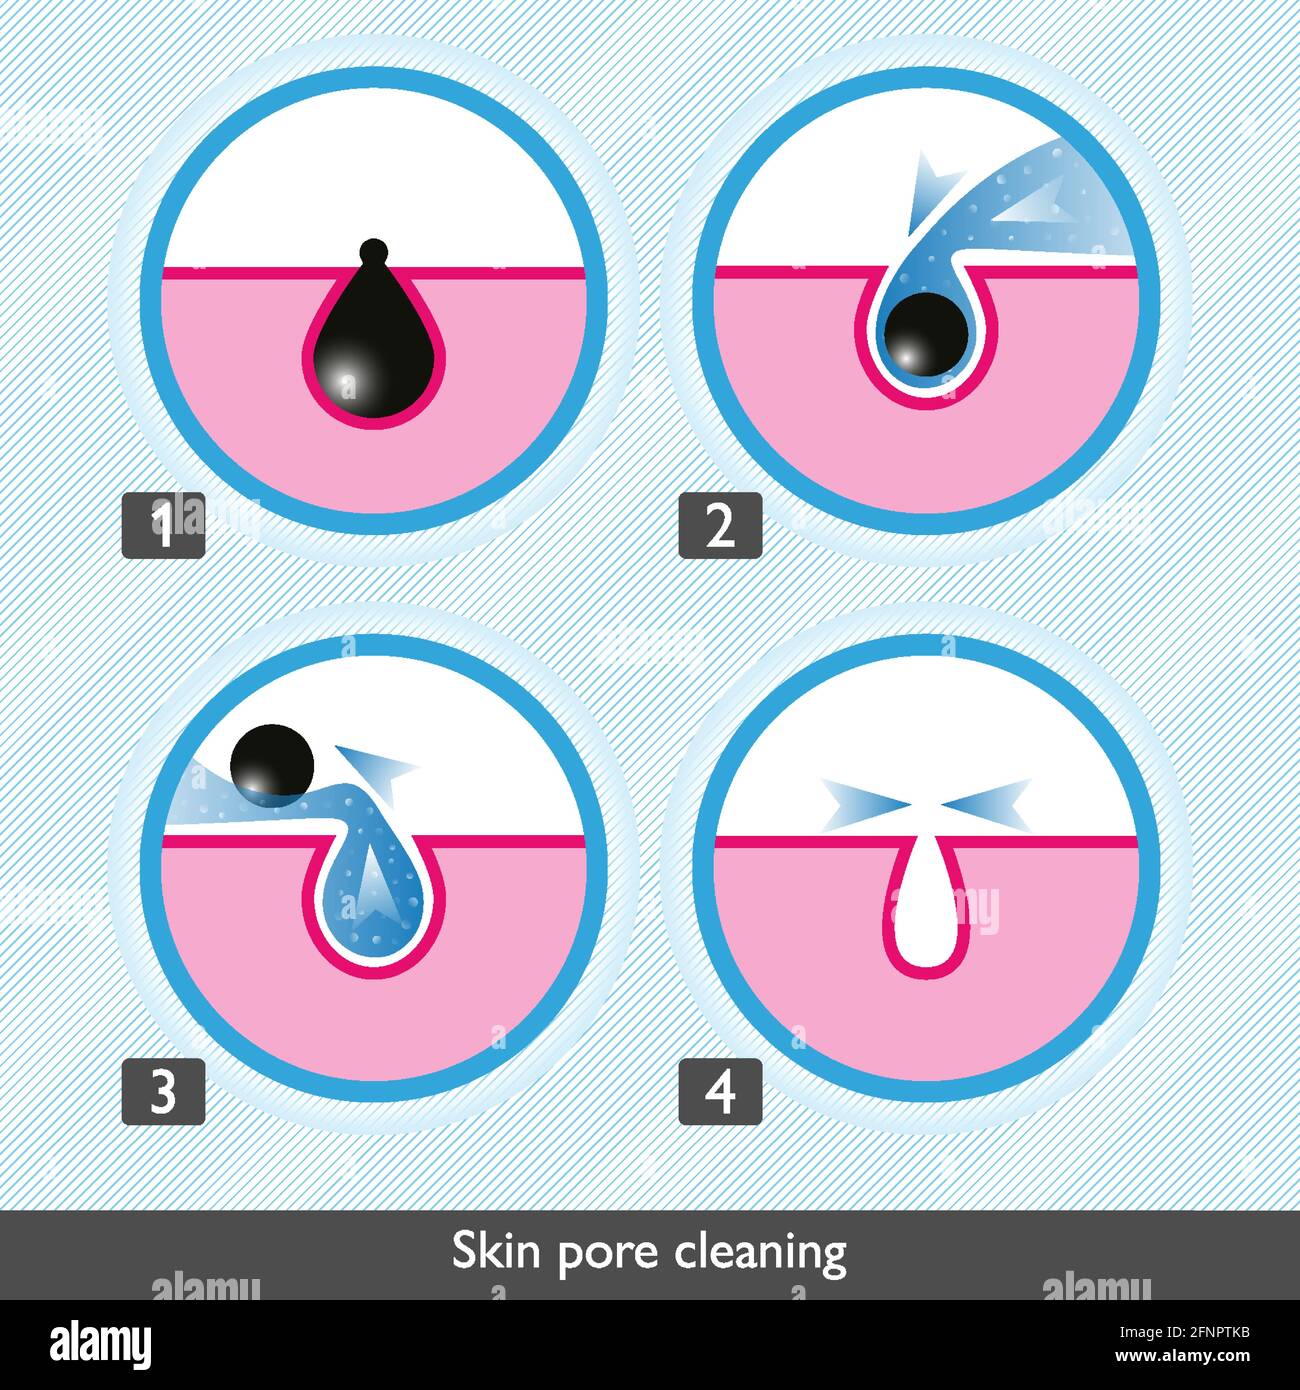 Skin pore cleansing process icons. Facial treatments colored icons. Treatment of skin diseases, sebum removal and pores cleaning and narrowing. Medica Stock Vector